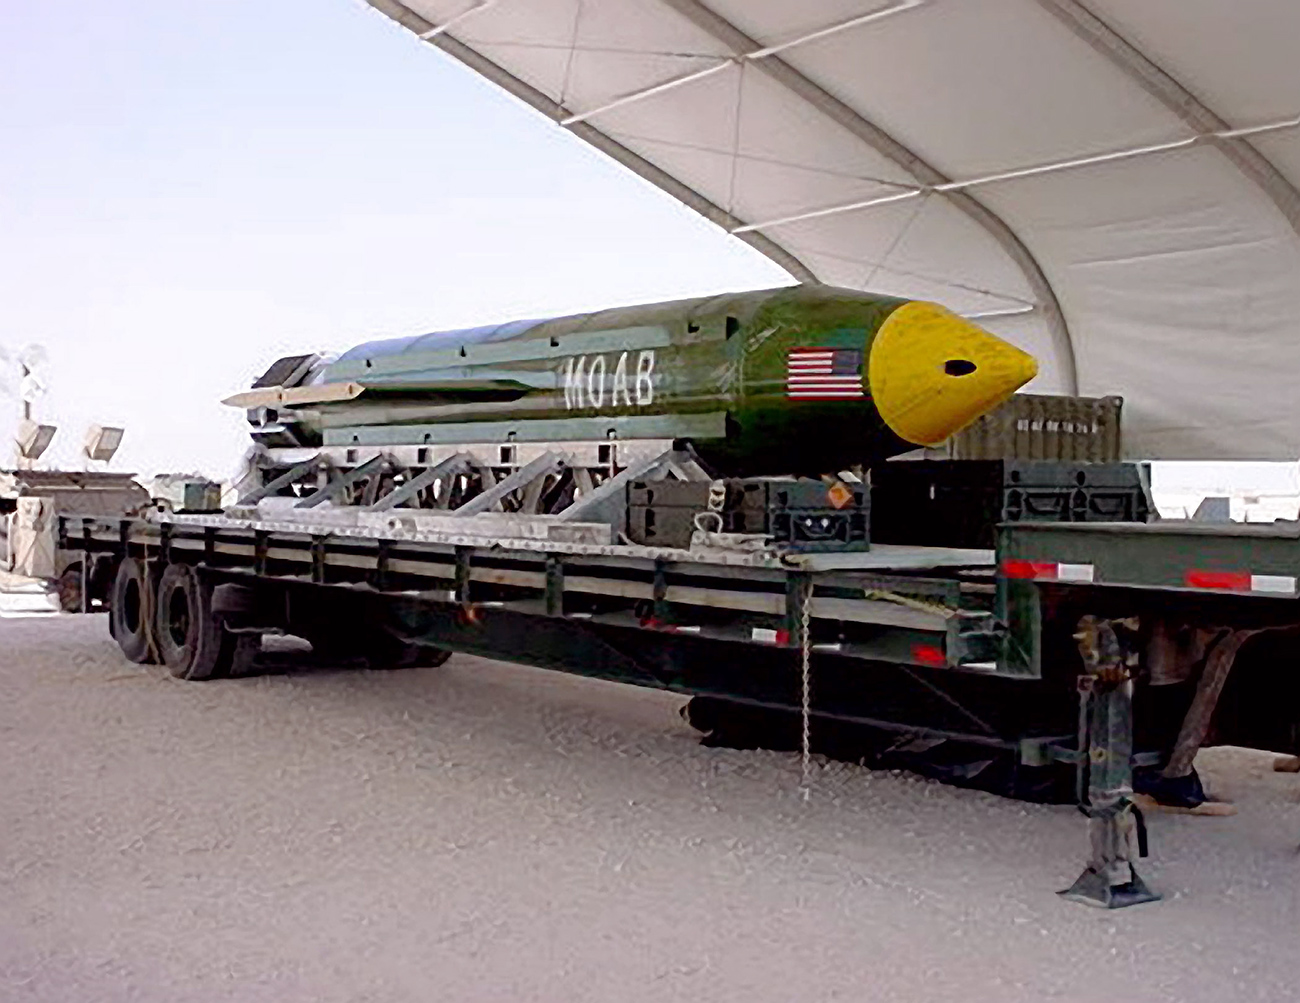 The GBU-43/B Massive Ordnance Air Blast bomb sits at an air base in Southwest Asia waiting to be used should it become necessary. Source: ZUMA Press/Global Look Press